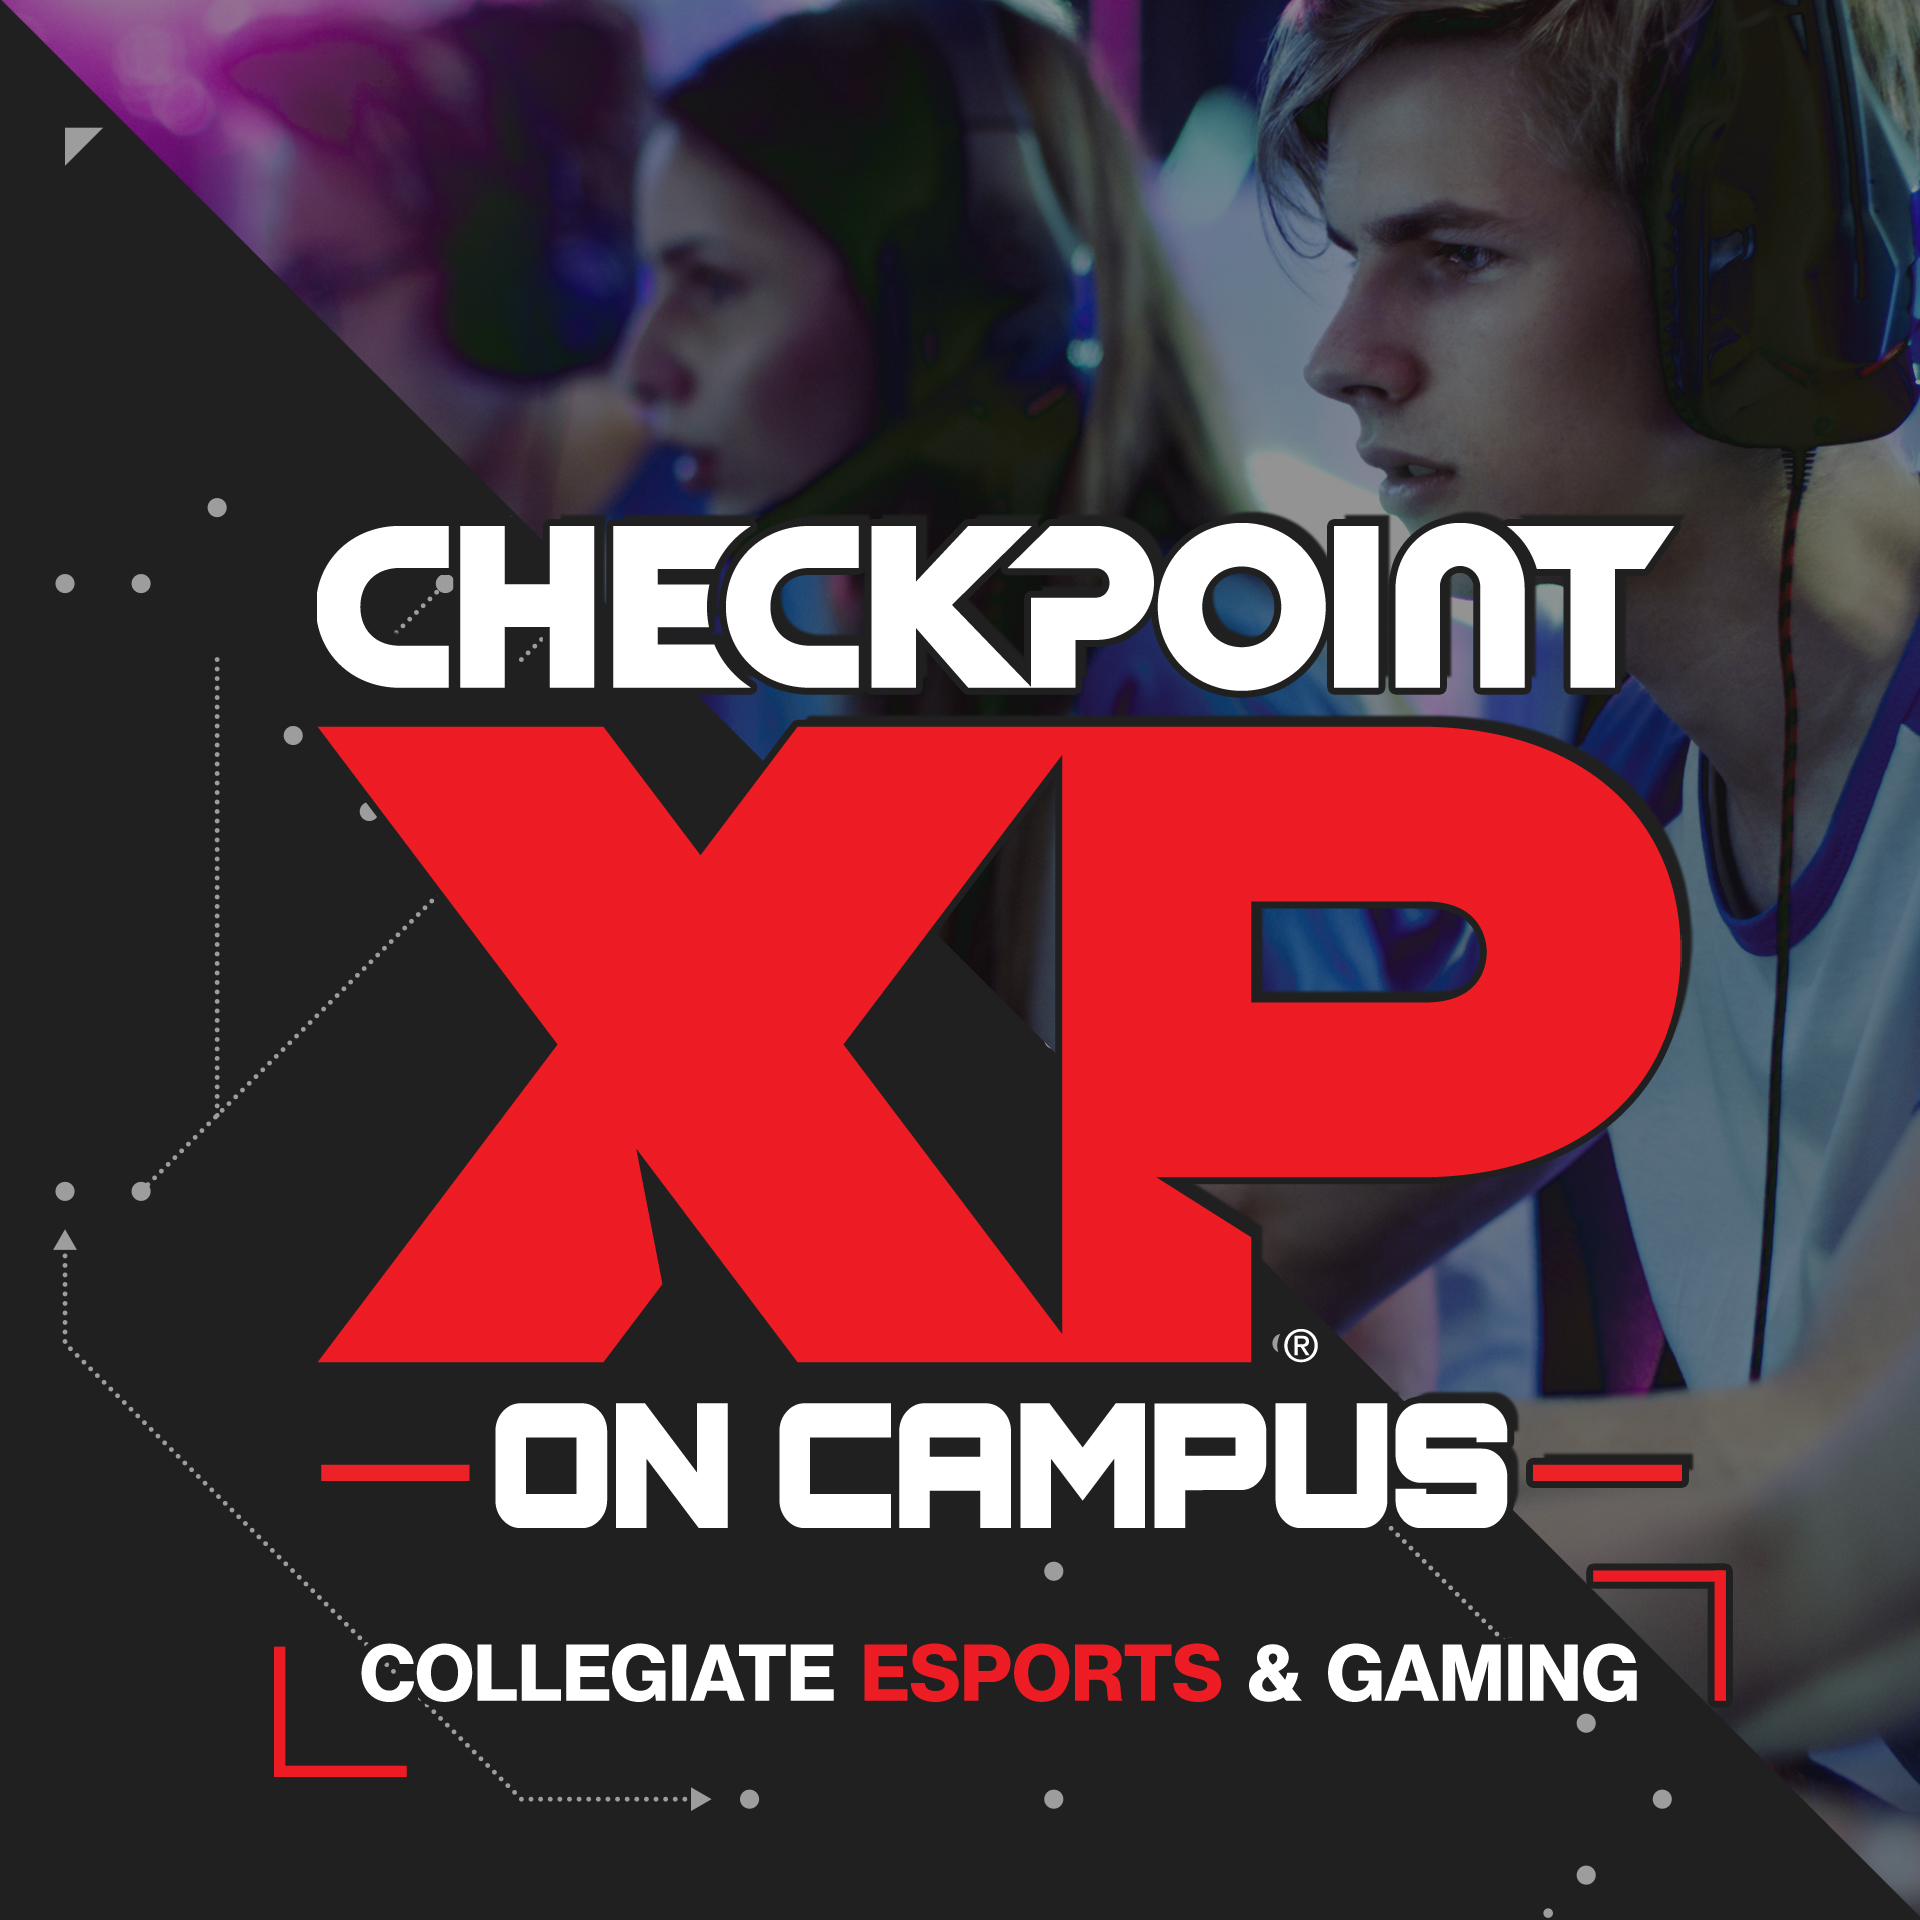 Historically Black Colleges & Universities Enter Esports with Degrees and Teams